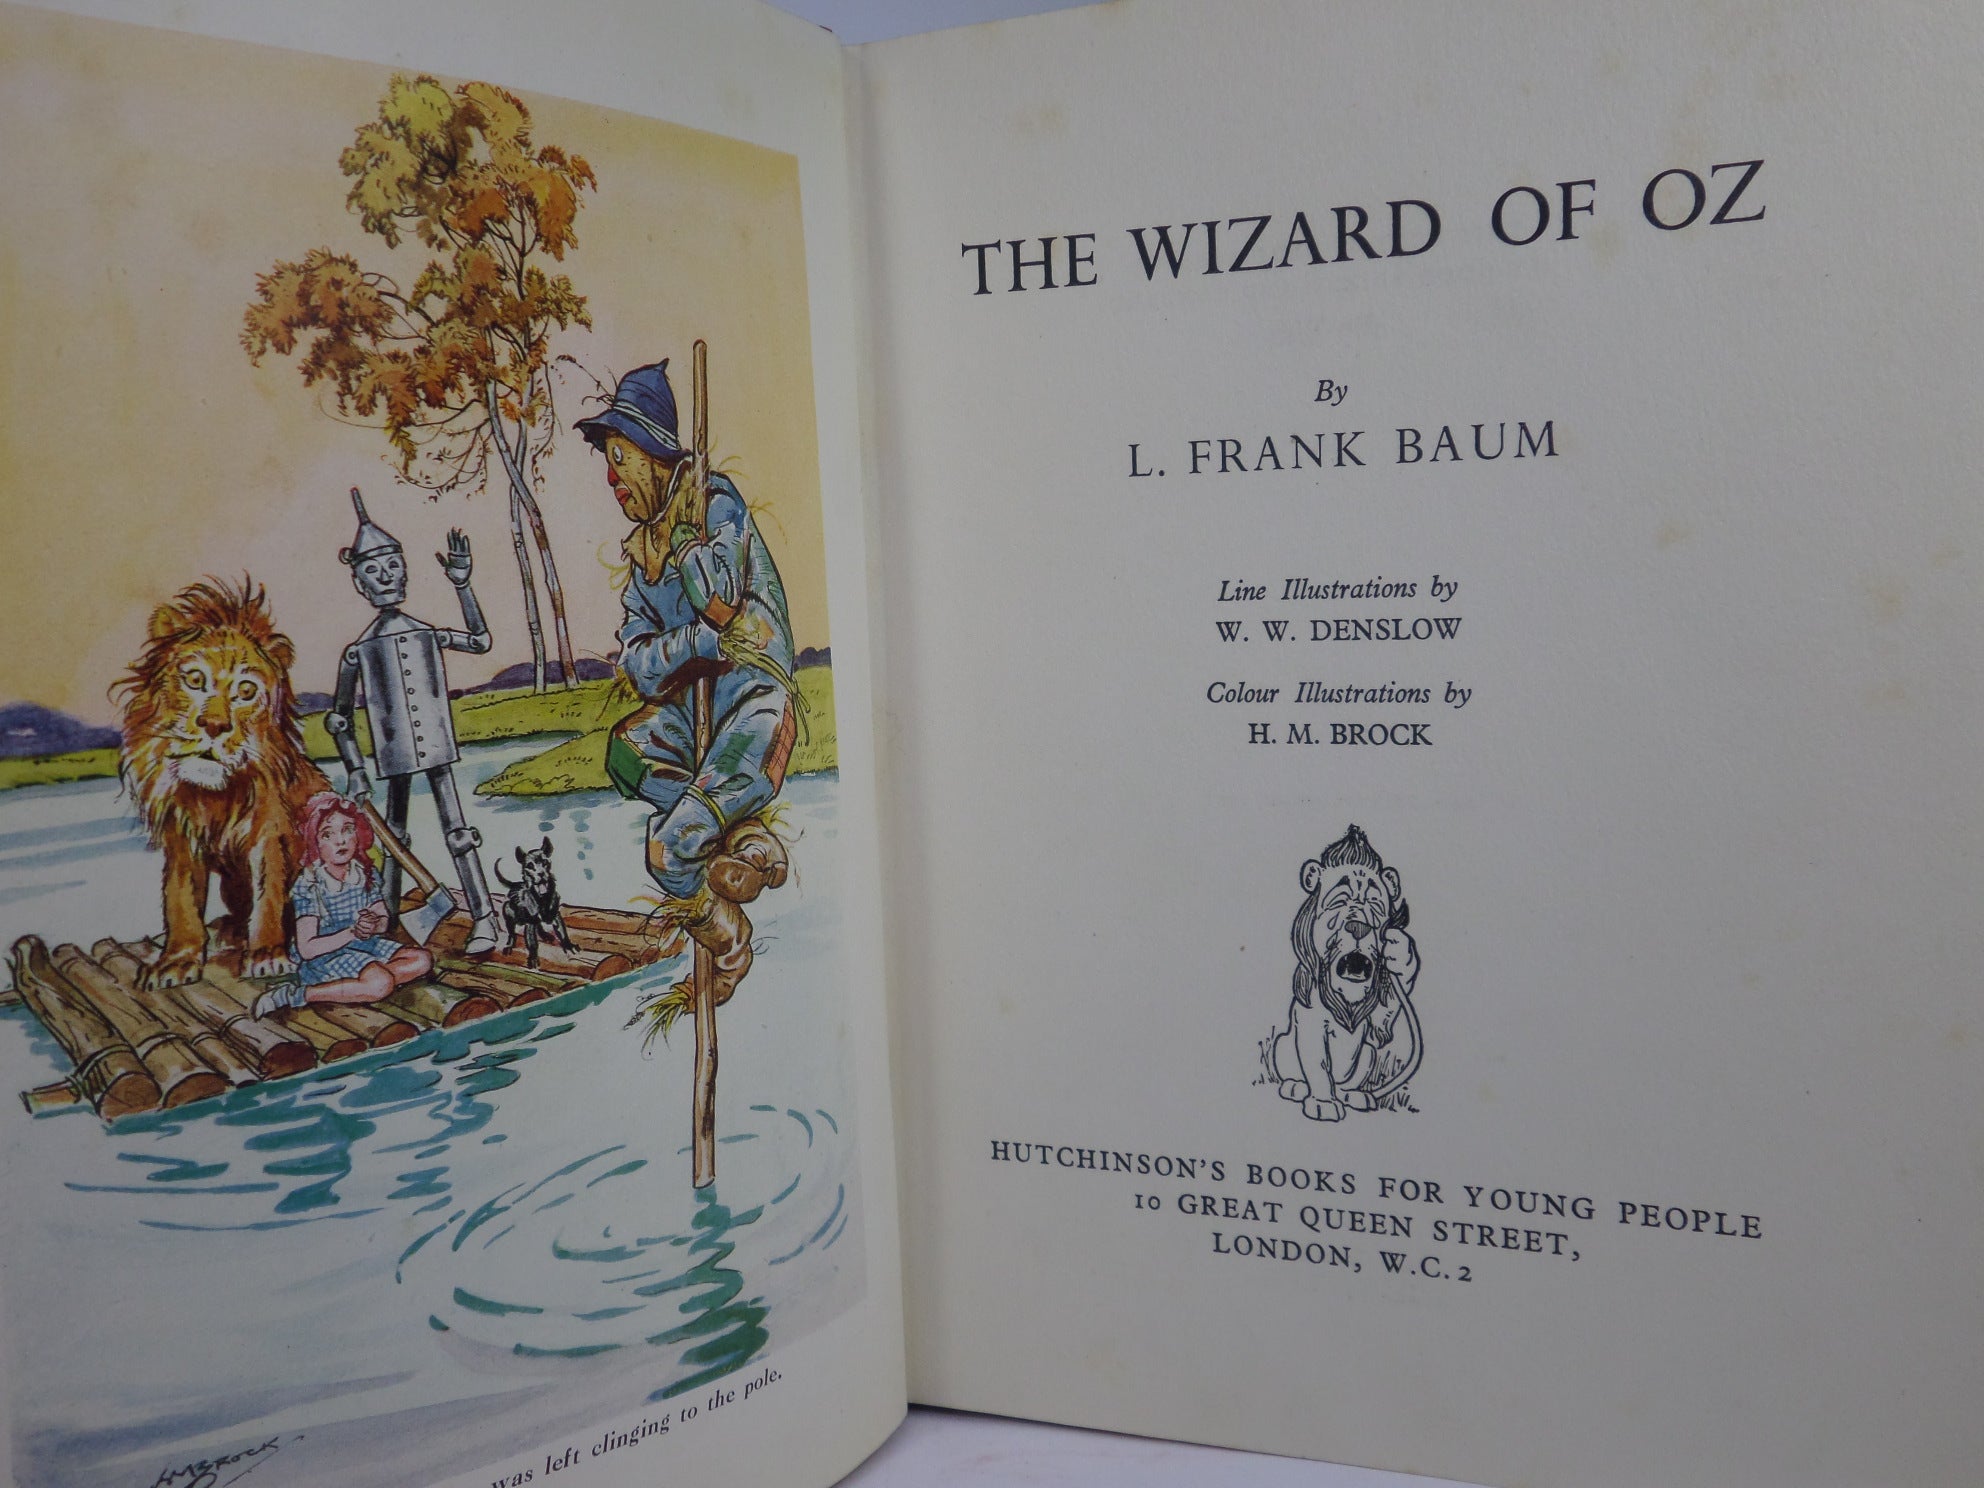 THE WIZARD OF OZ BY L. FRANK BAUM 1947 ILLUSTRATED BY W.W. DENSLOW & H.M. BROCK